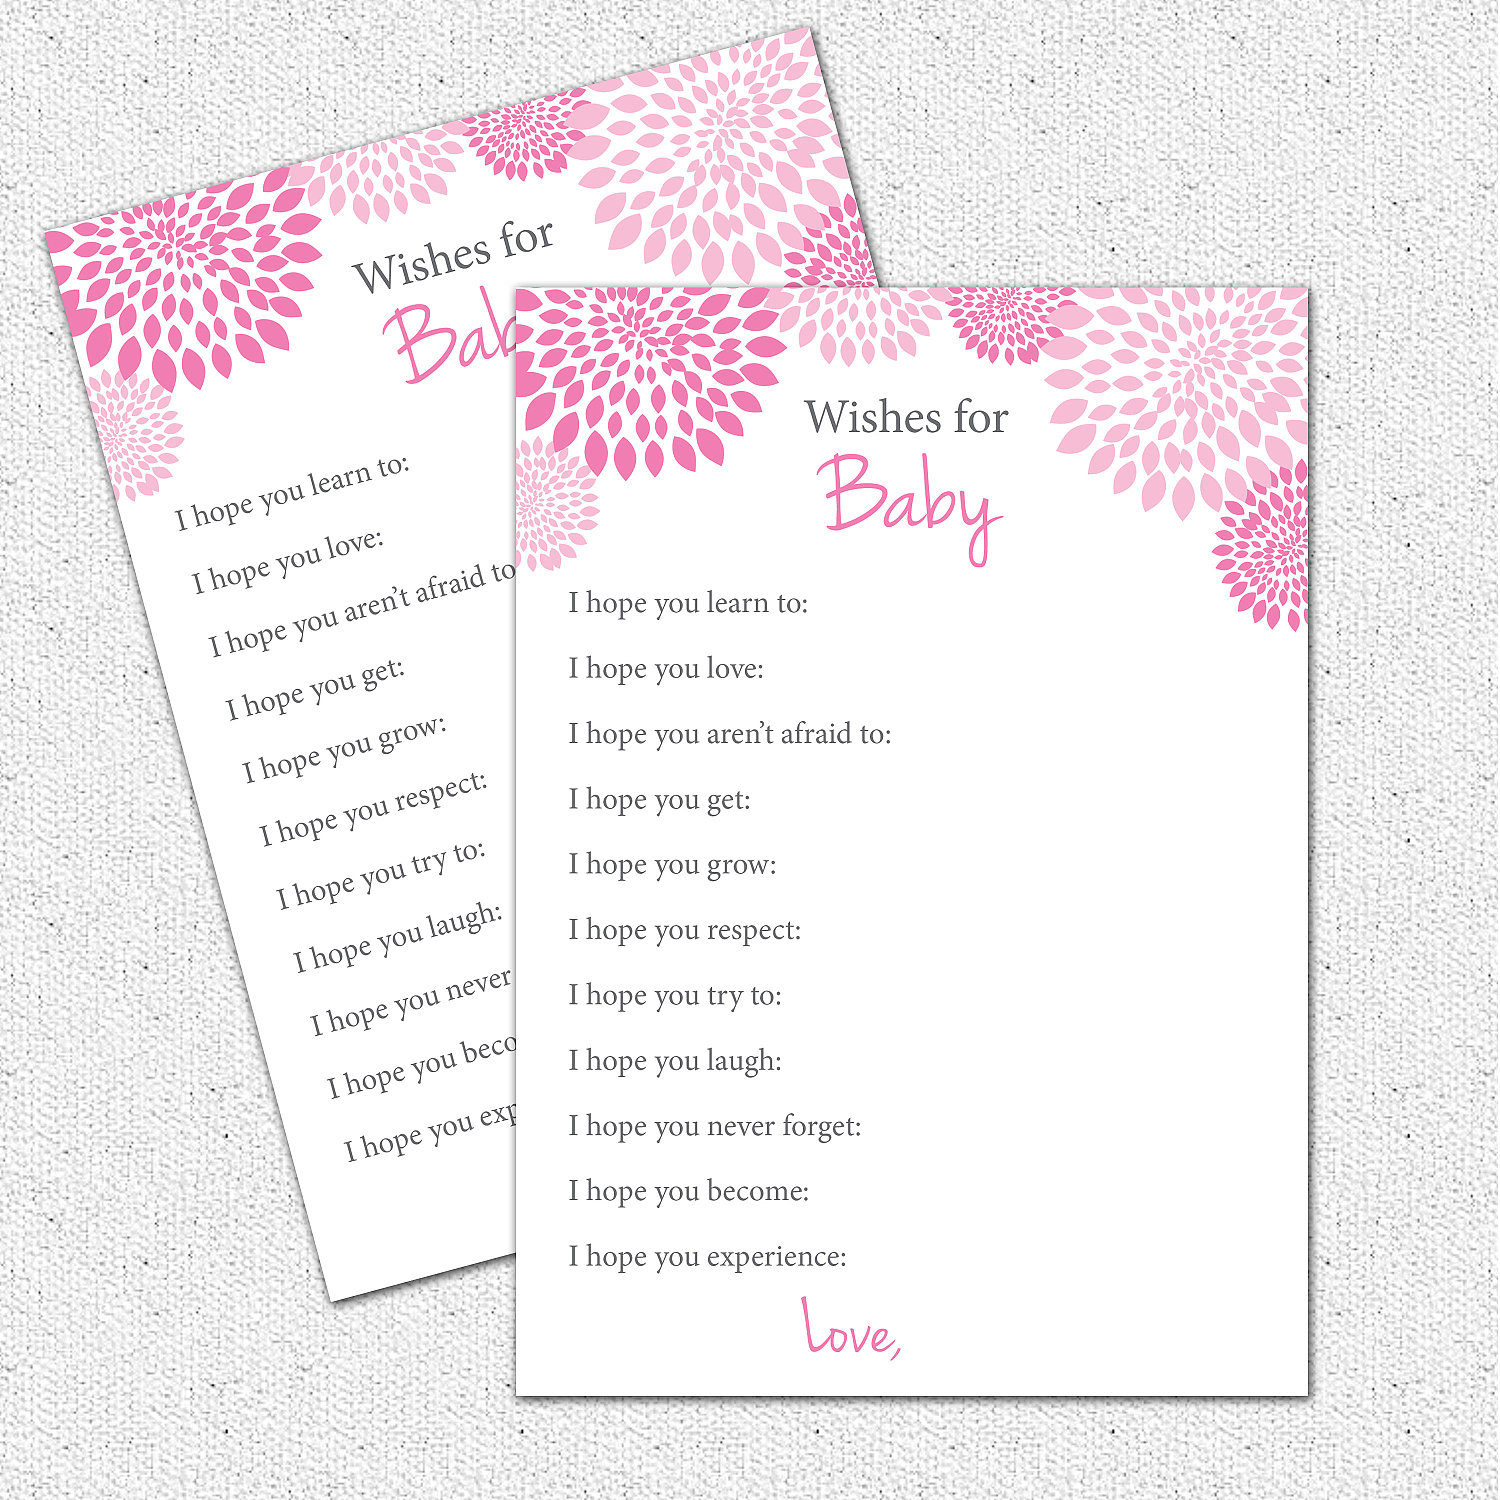 6 Best Images of Printable Wishes For Baby Template Free Printable